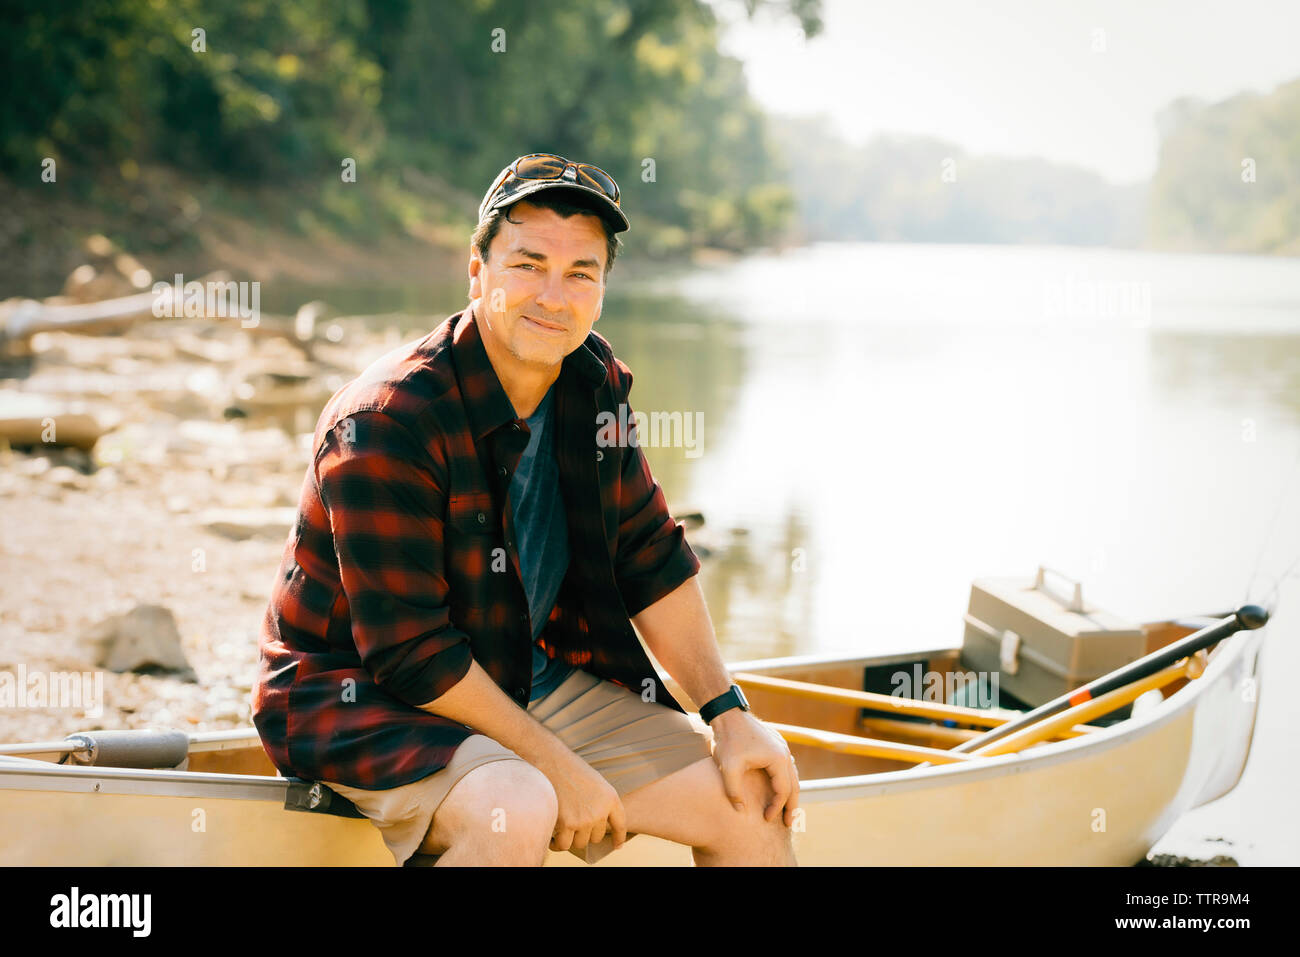 Portrait of mid adult man sitting on boat at lakeshore Stock Photo